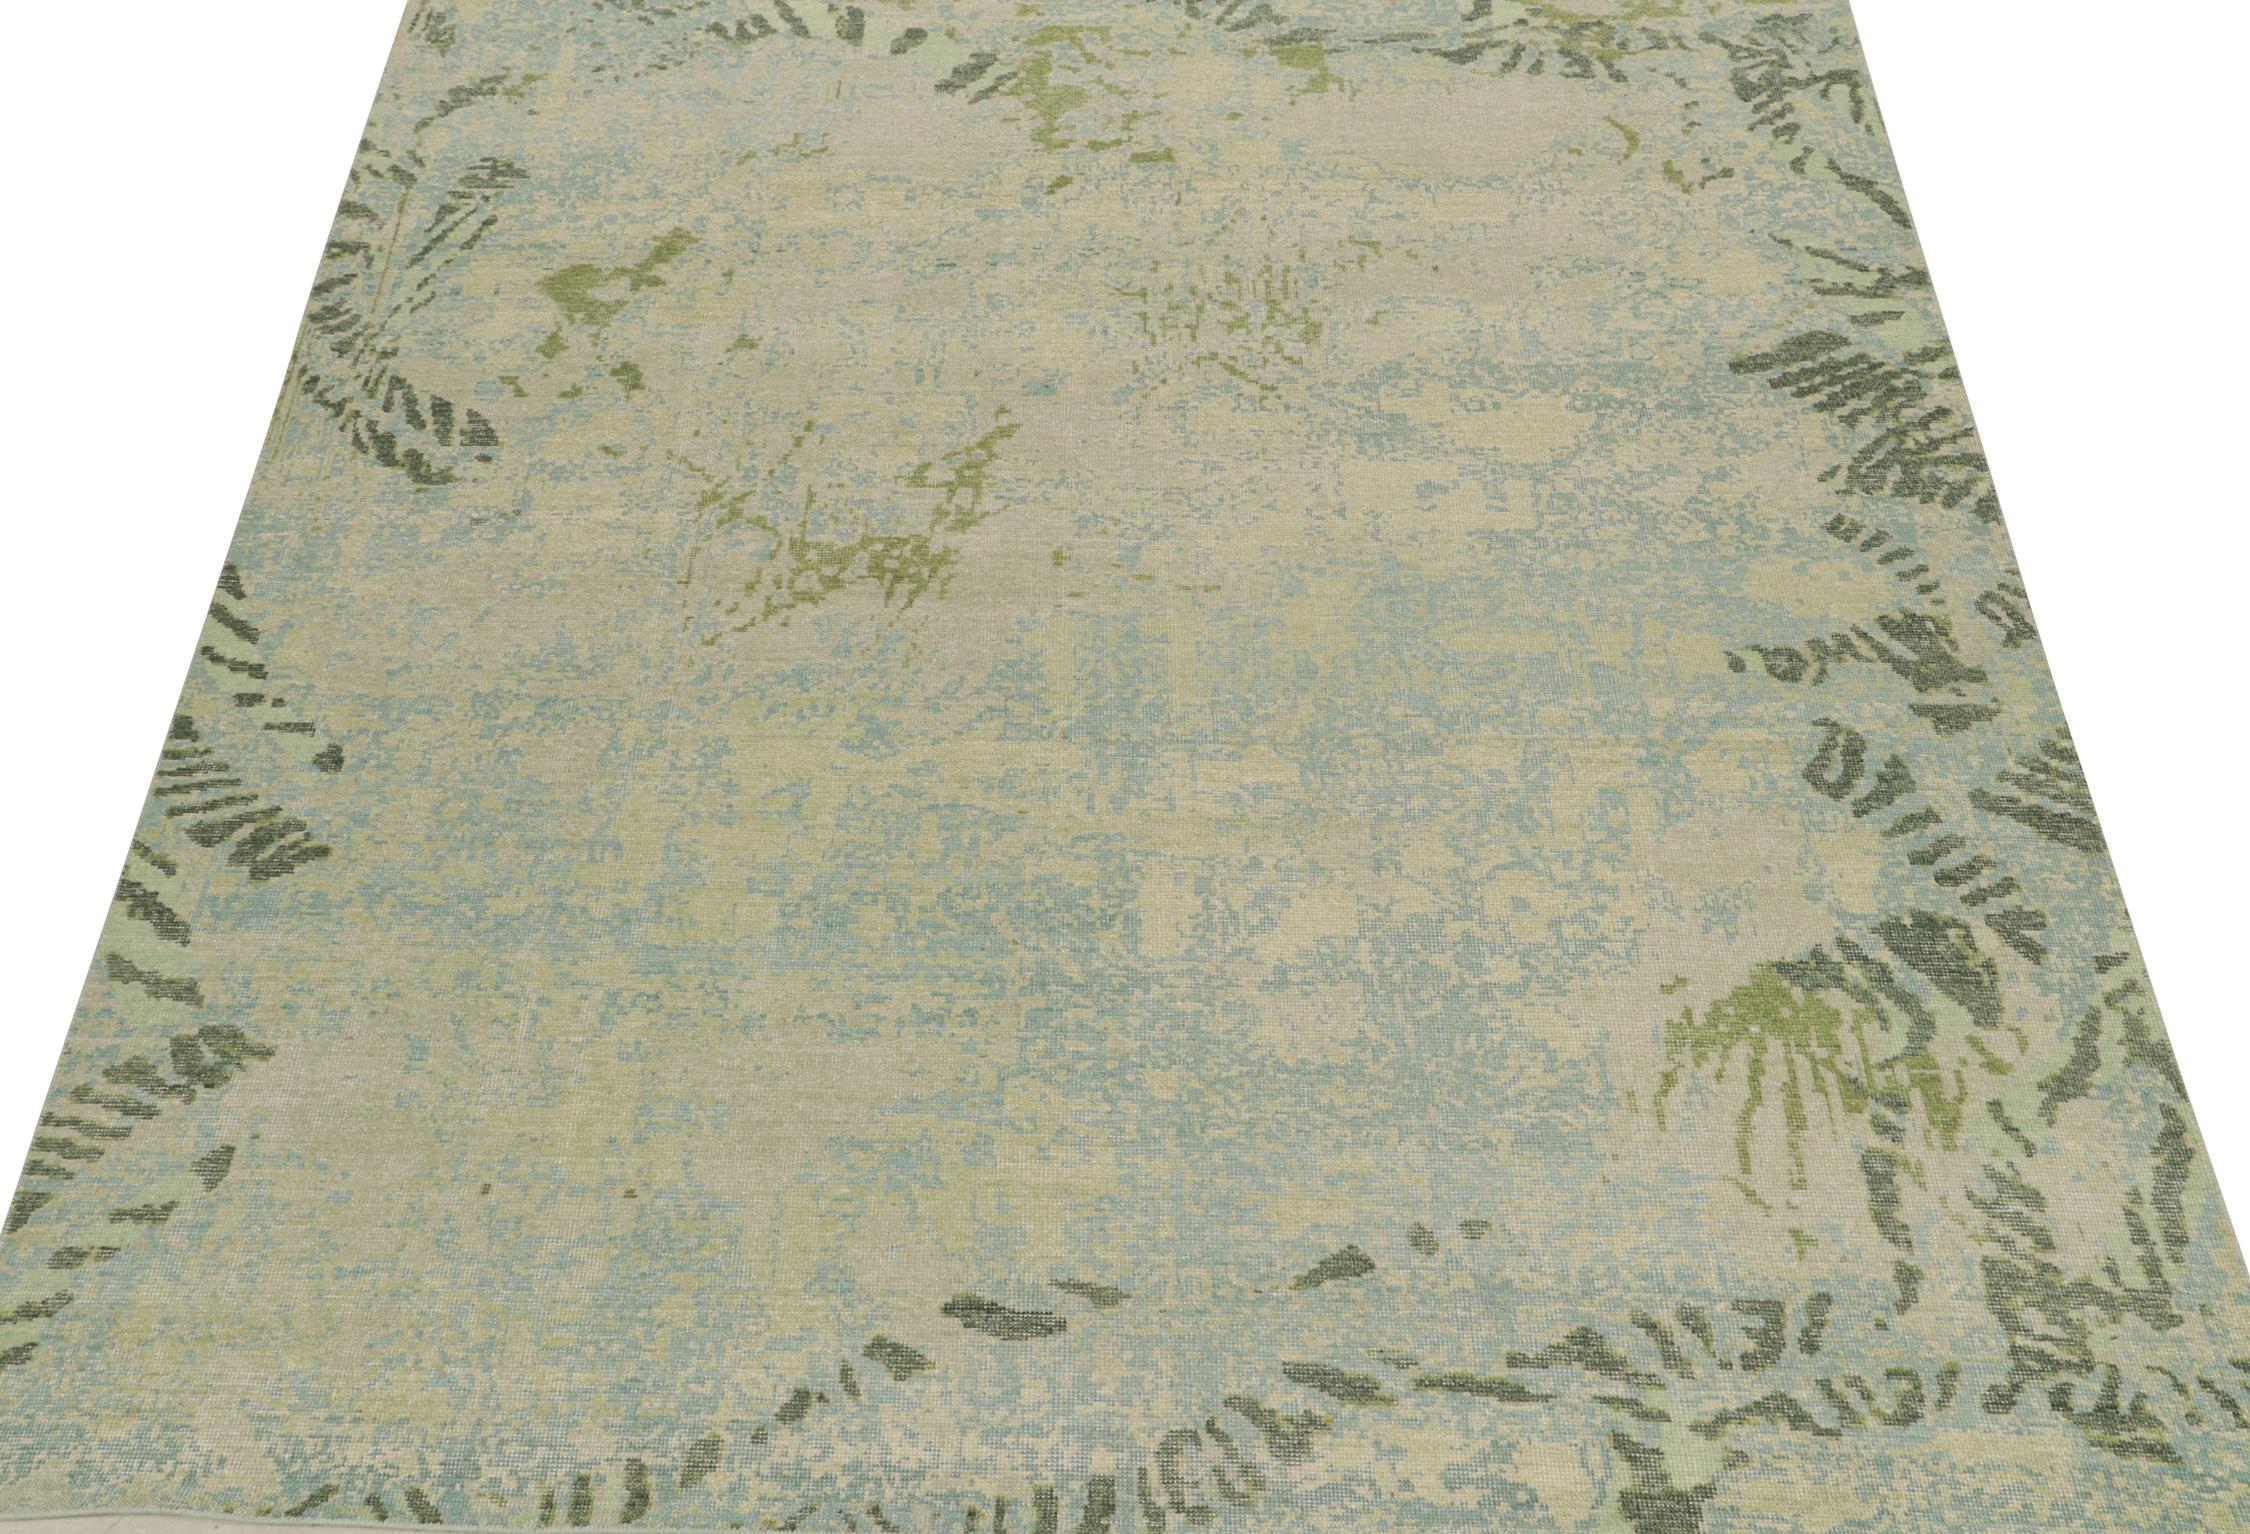 Moderne Rug & Kilim's Distressed Style Abstract Rug in Blue, Gray and Green Pattern (Tapis abstrait à motifs bleus, gris et verts) en vente